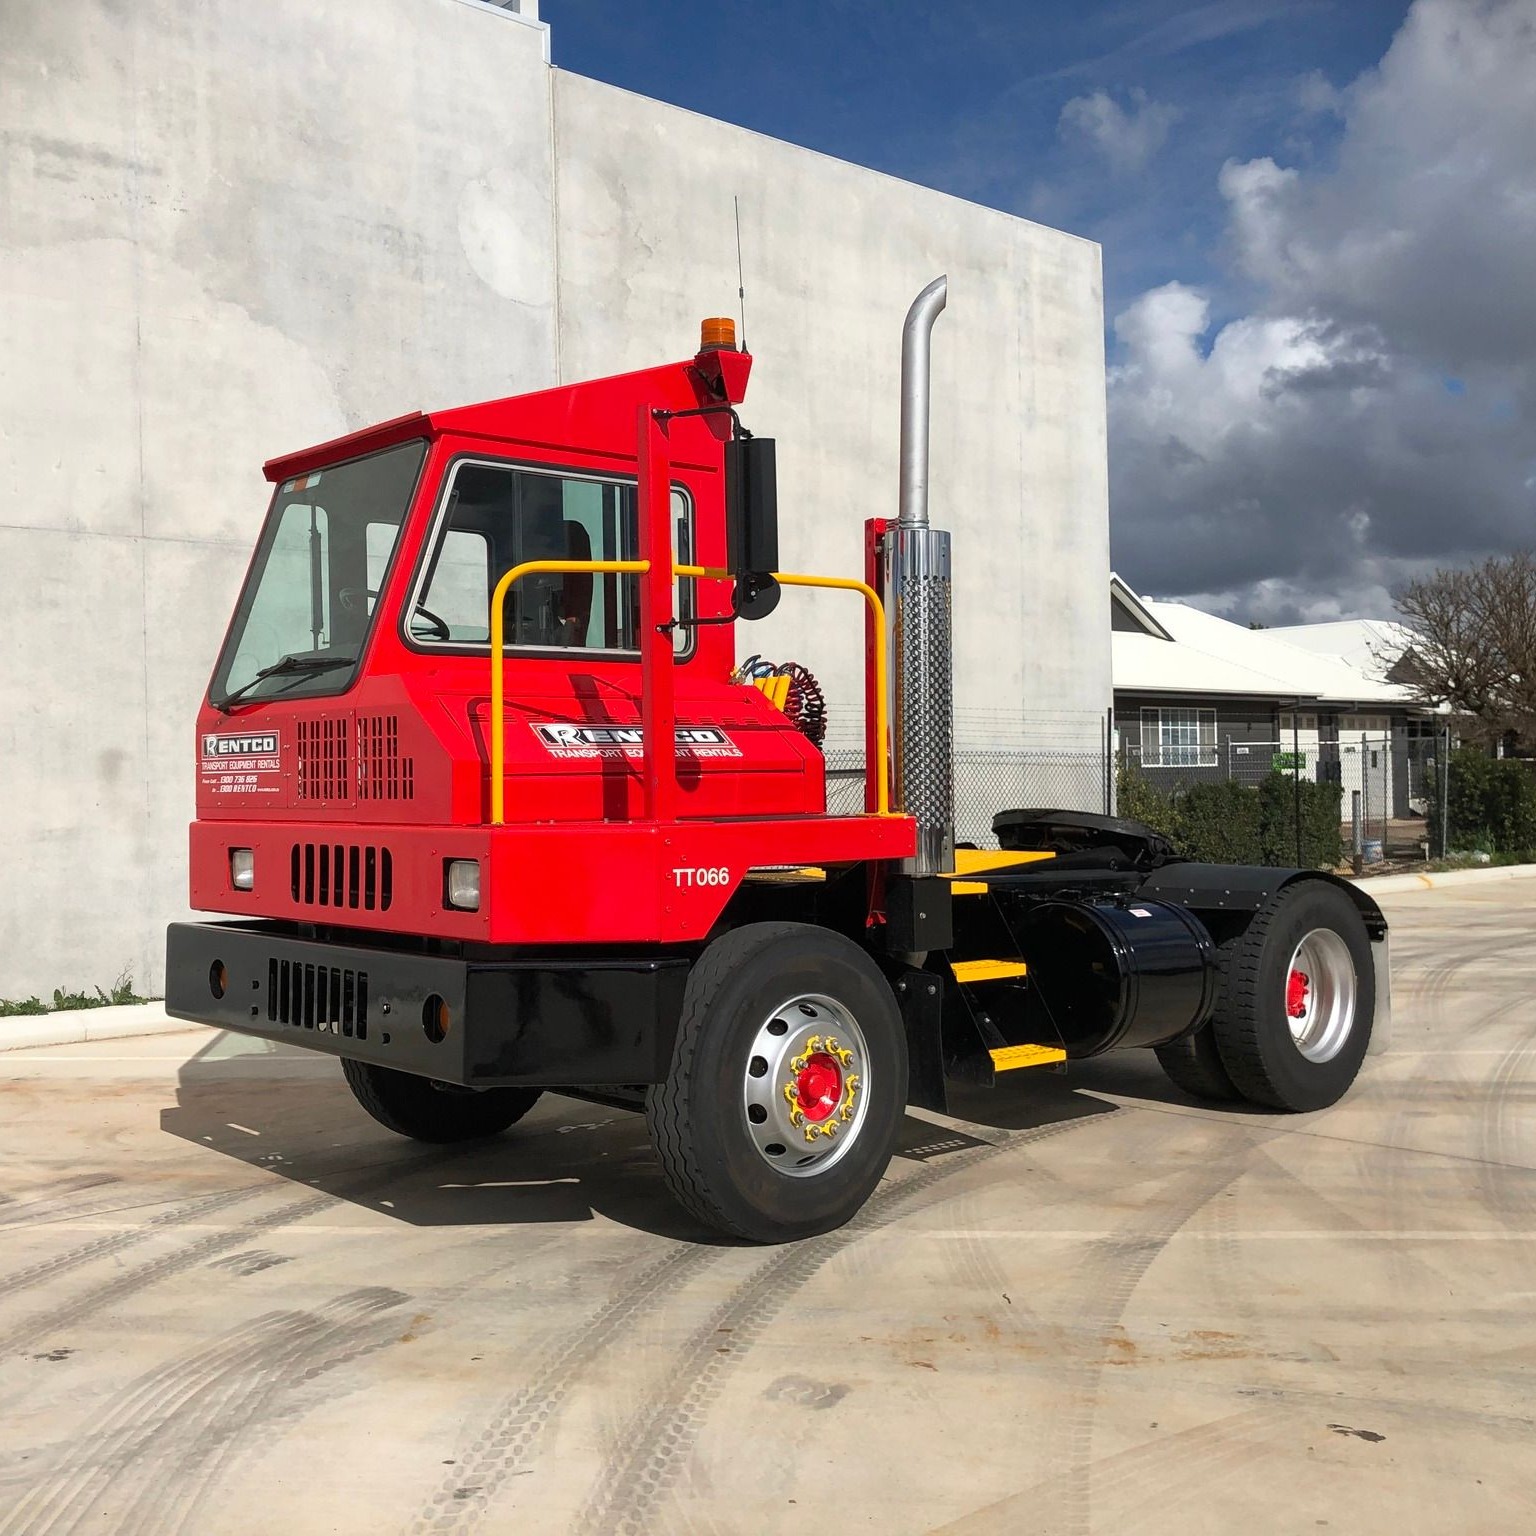 Small truck hire, red truck from Rentco